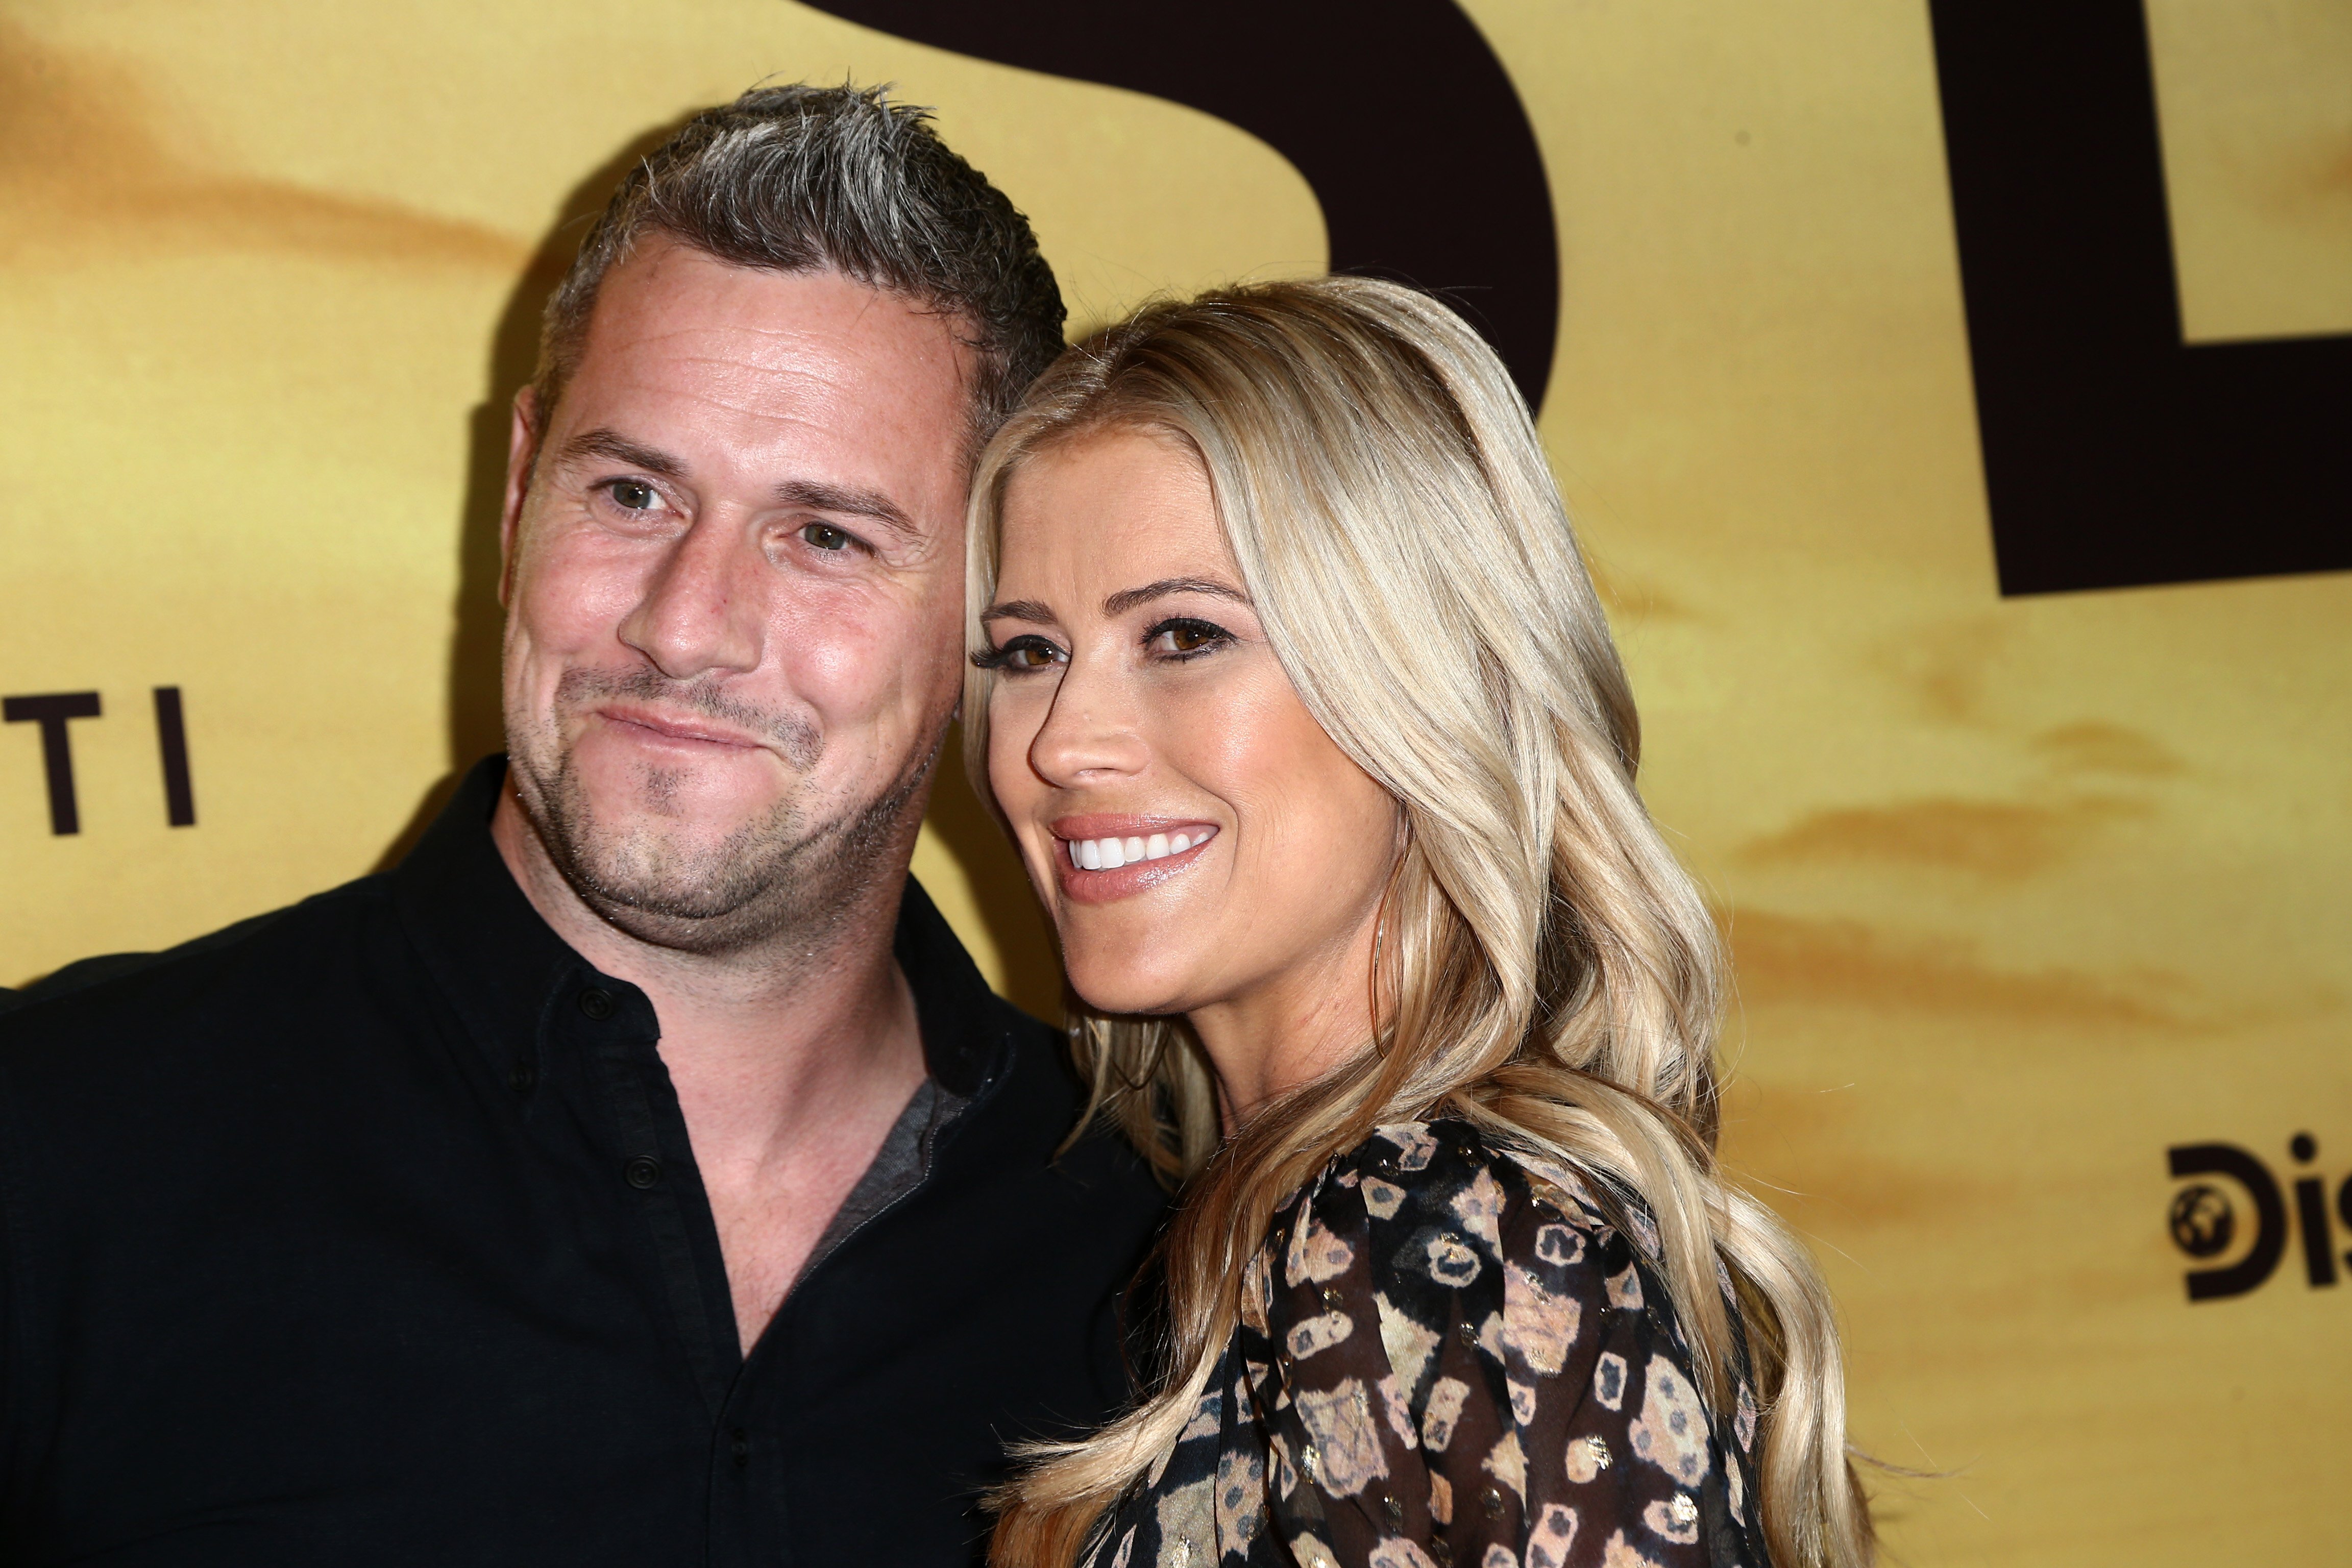 Ant and Christina Anstead attends the screening of "Serengeti" in Beverly Hills, California on July 23, 2019 | Photo: Getty Images